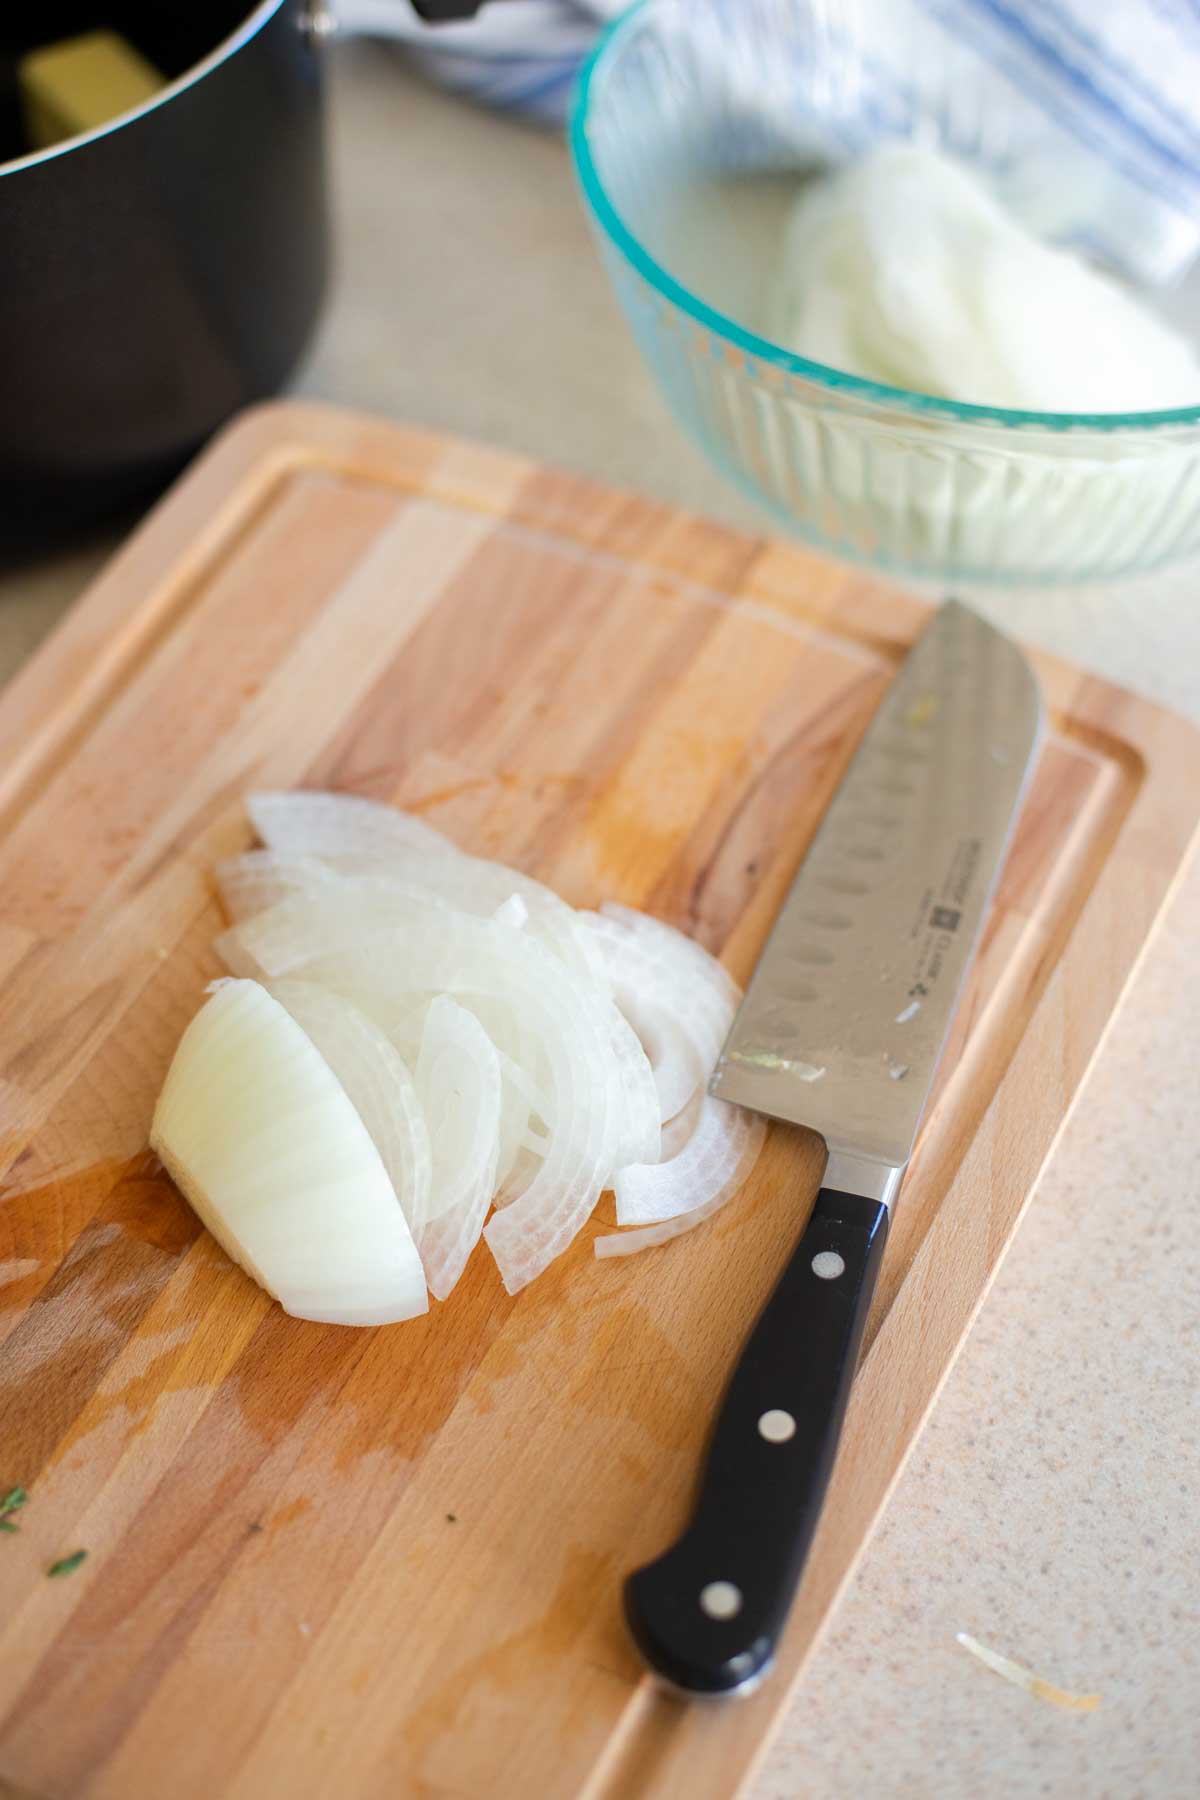 Slice the onions very thinly on a cutting board.